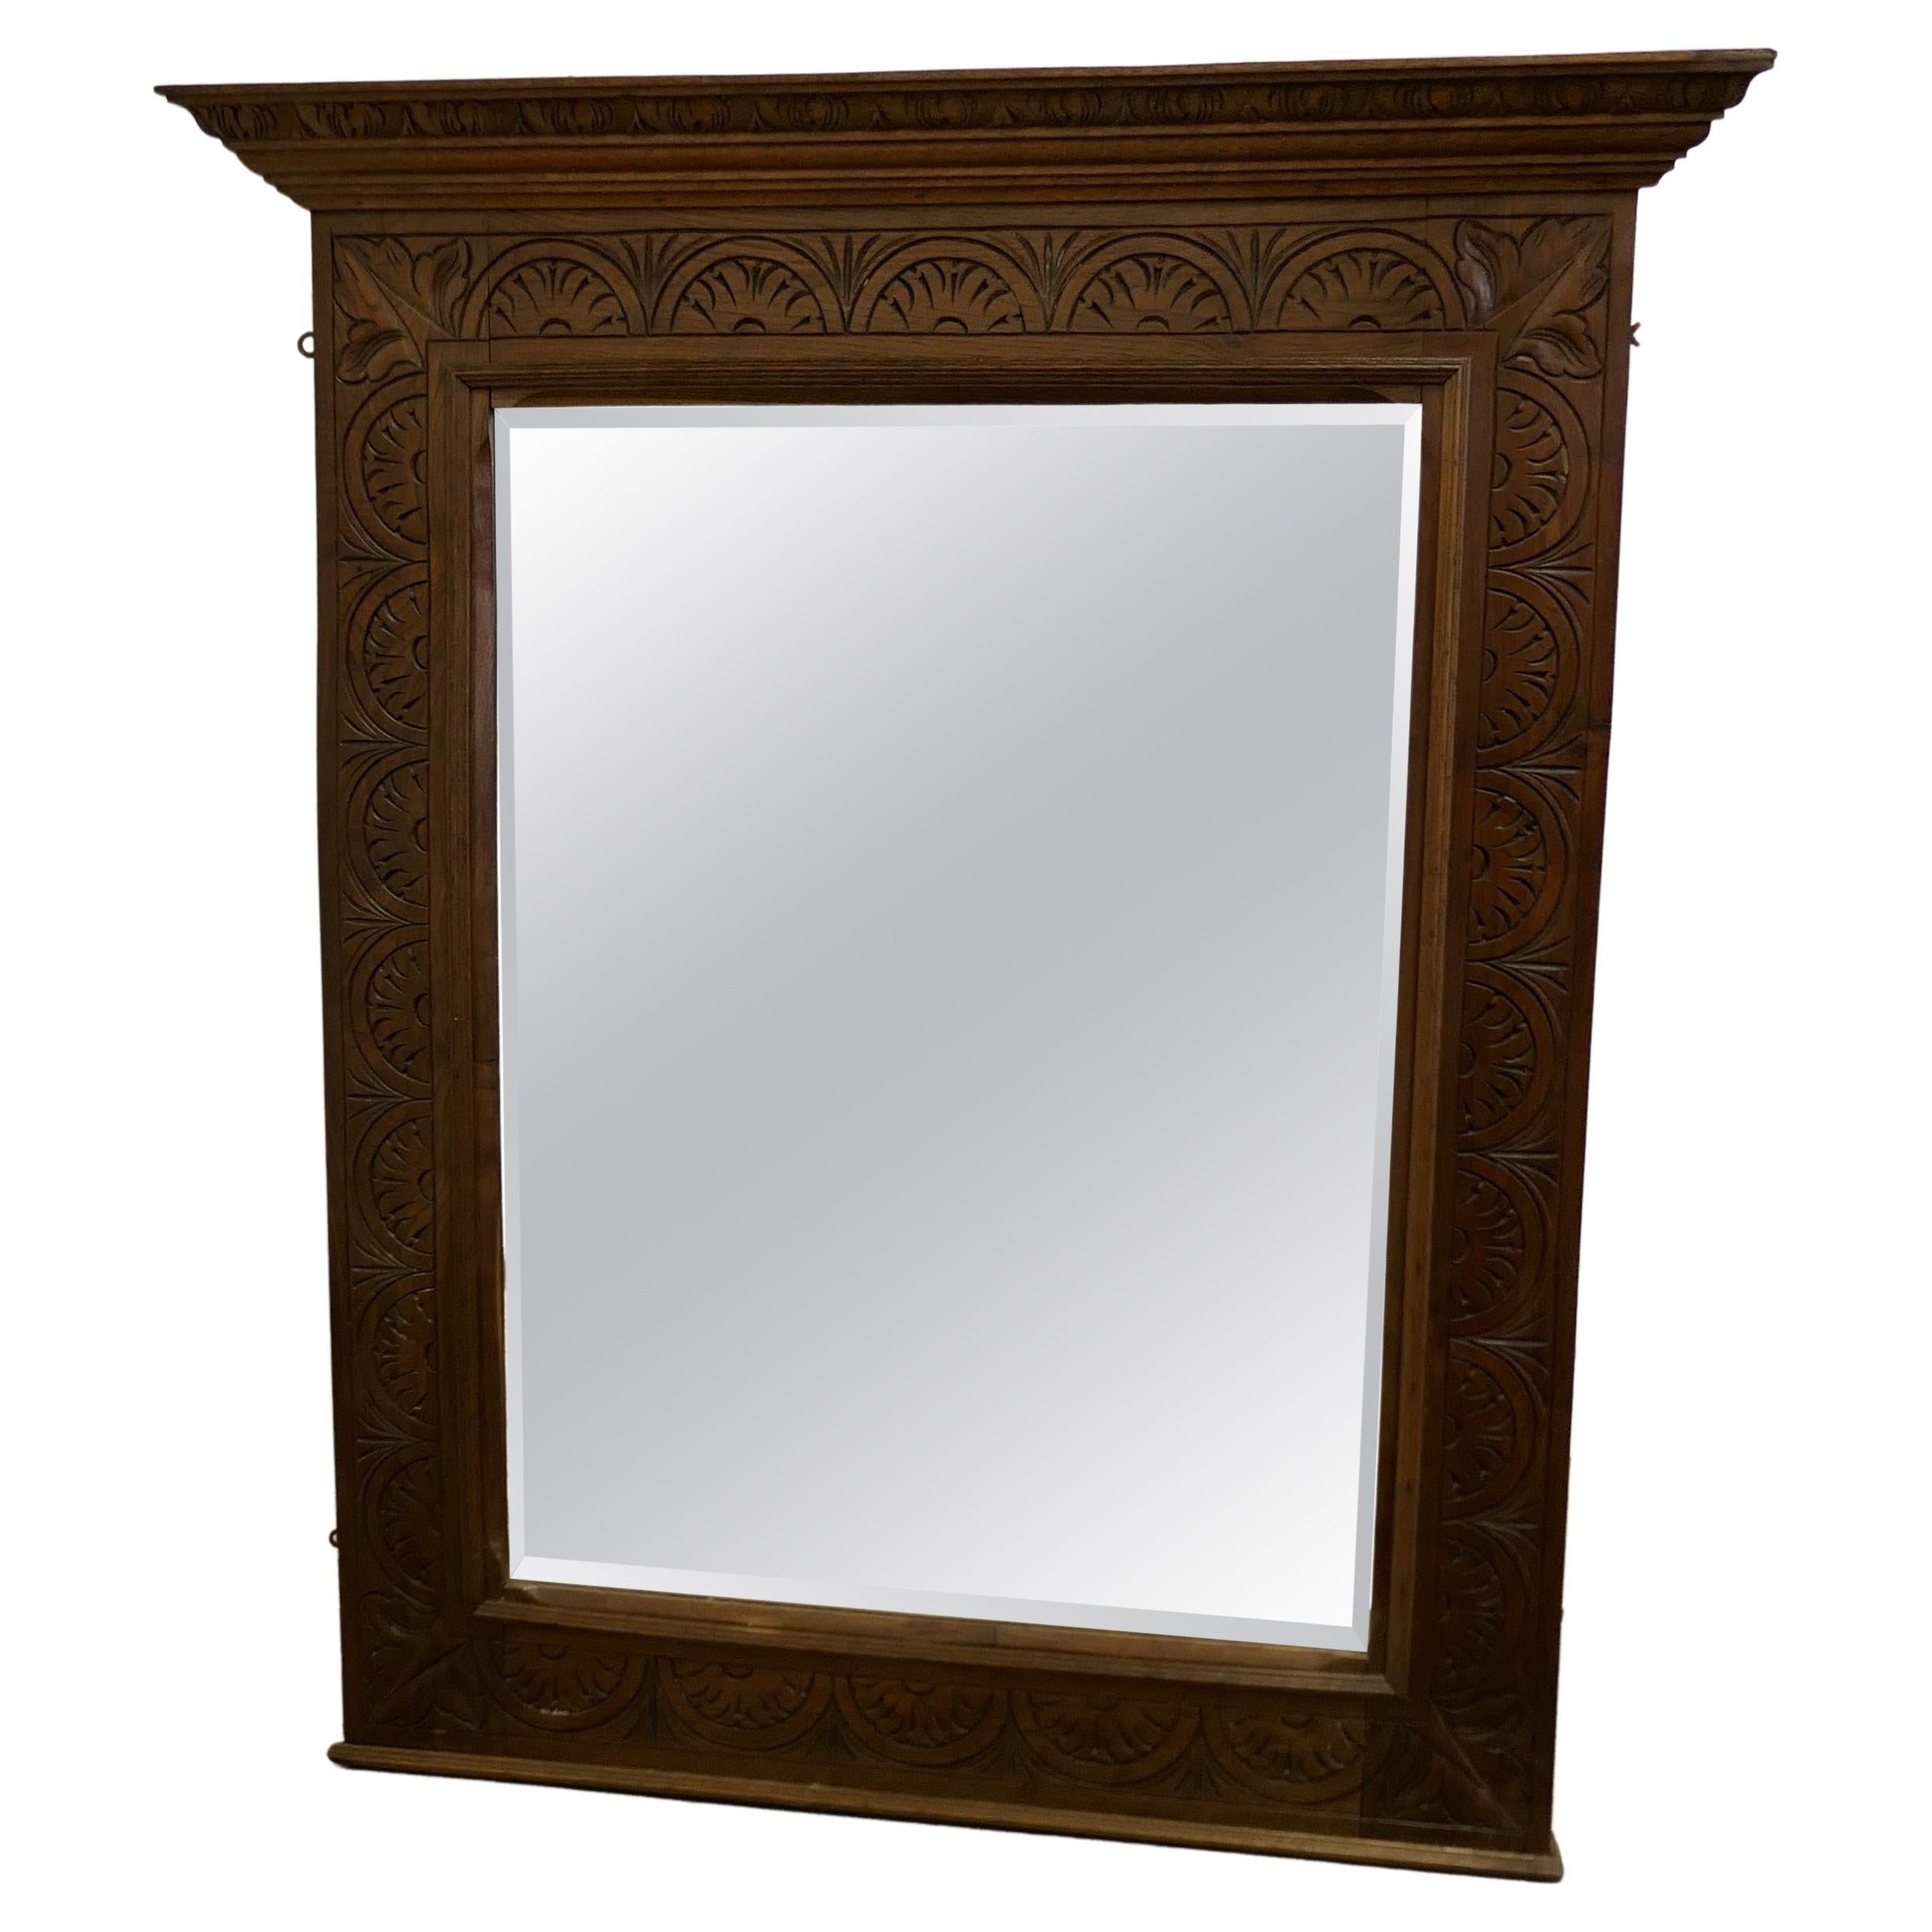 A Very Large Carved Oak Overmantel or Wall Mirror    